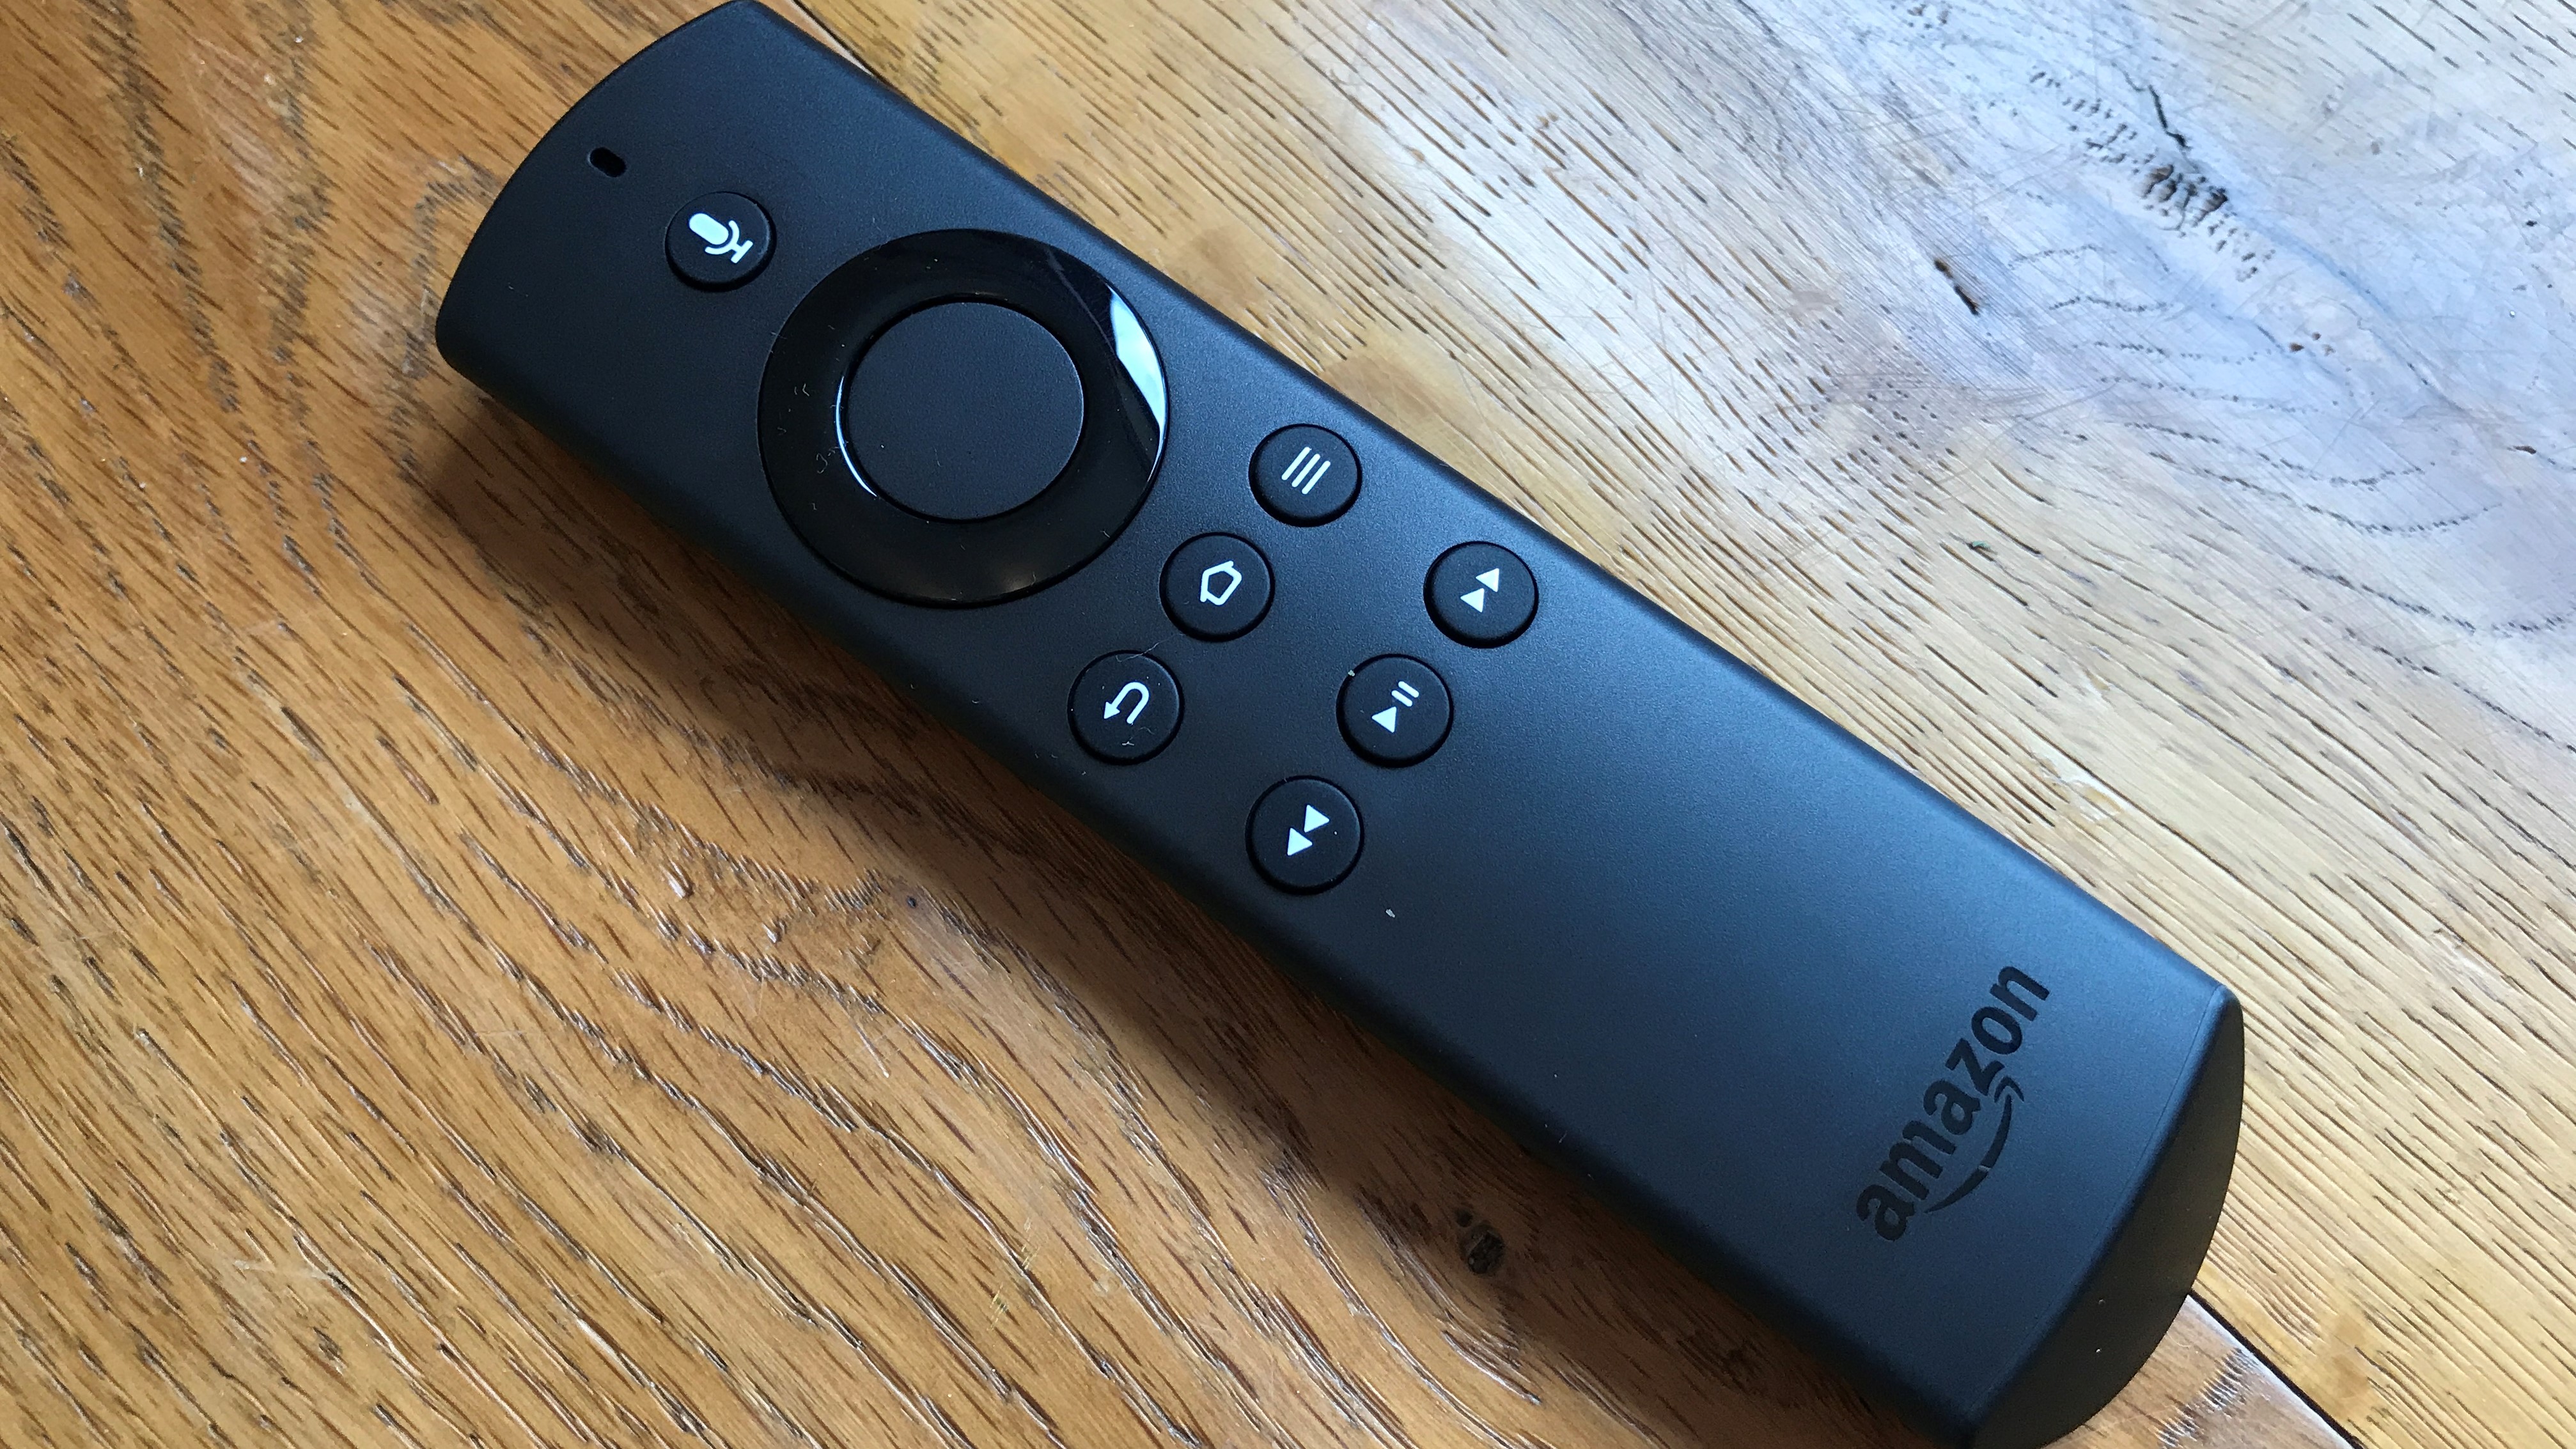 fire stick review